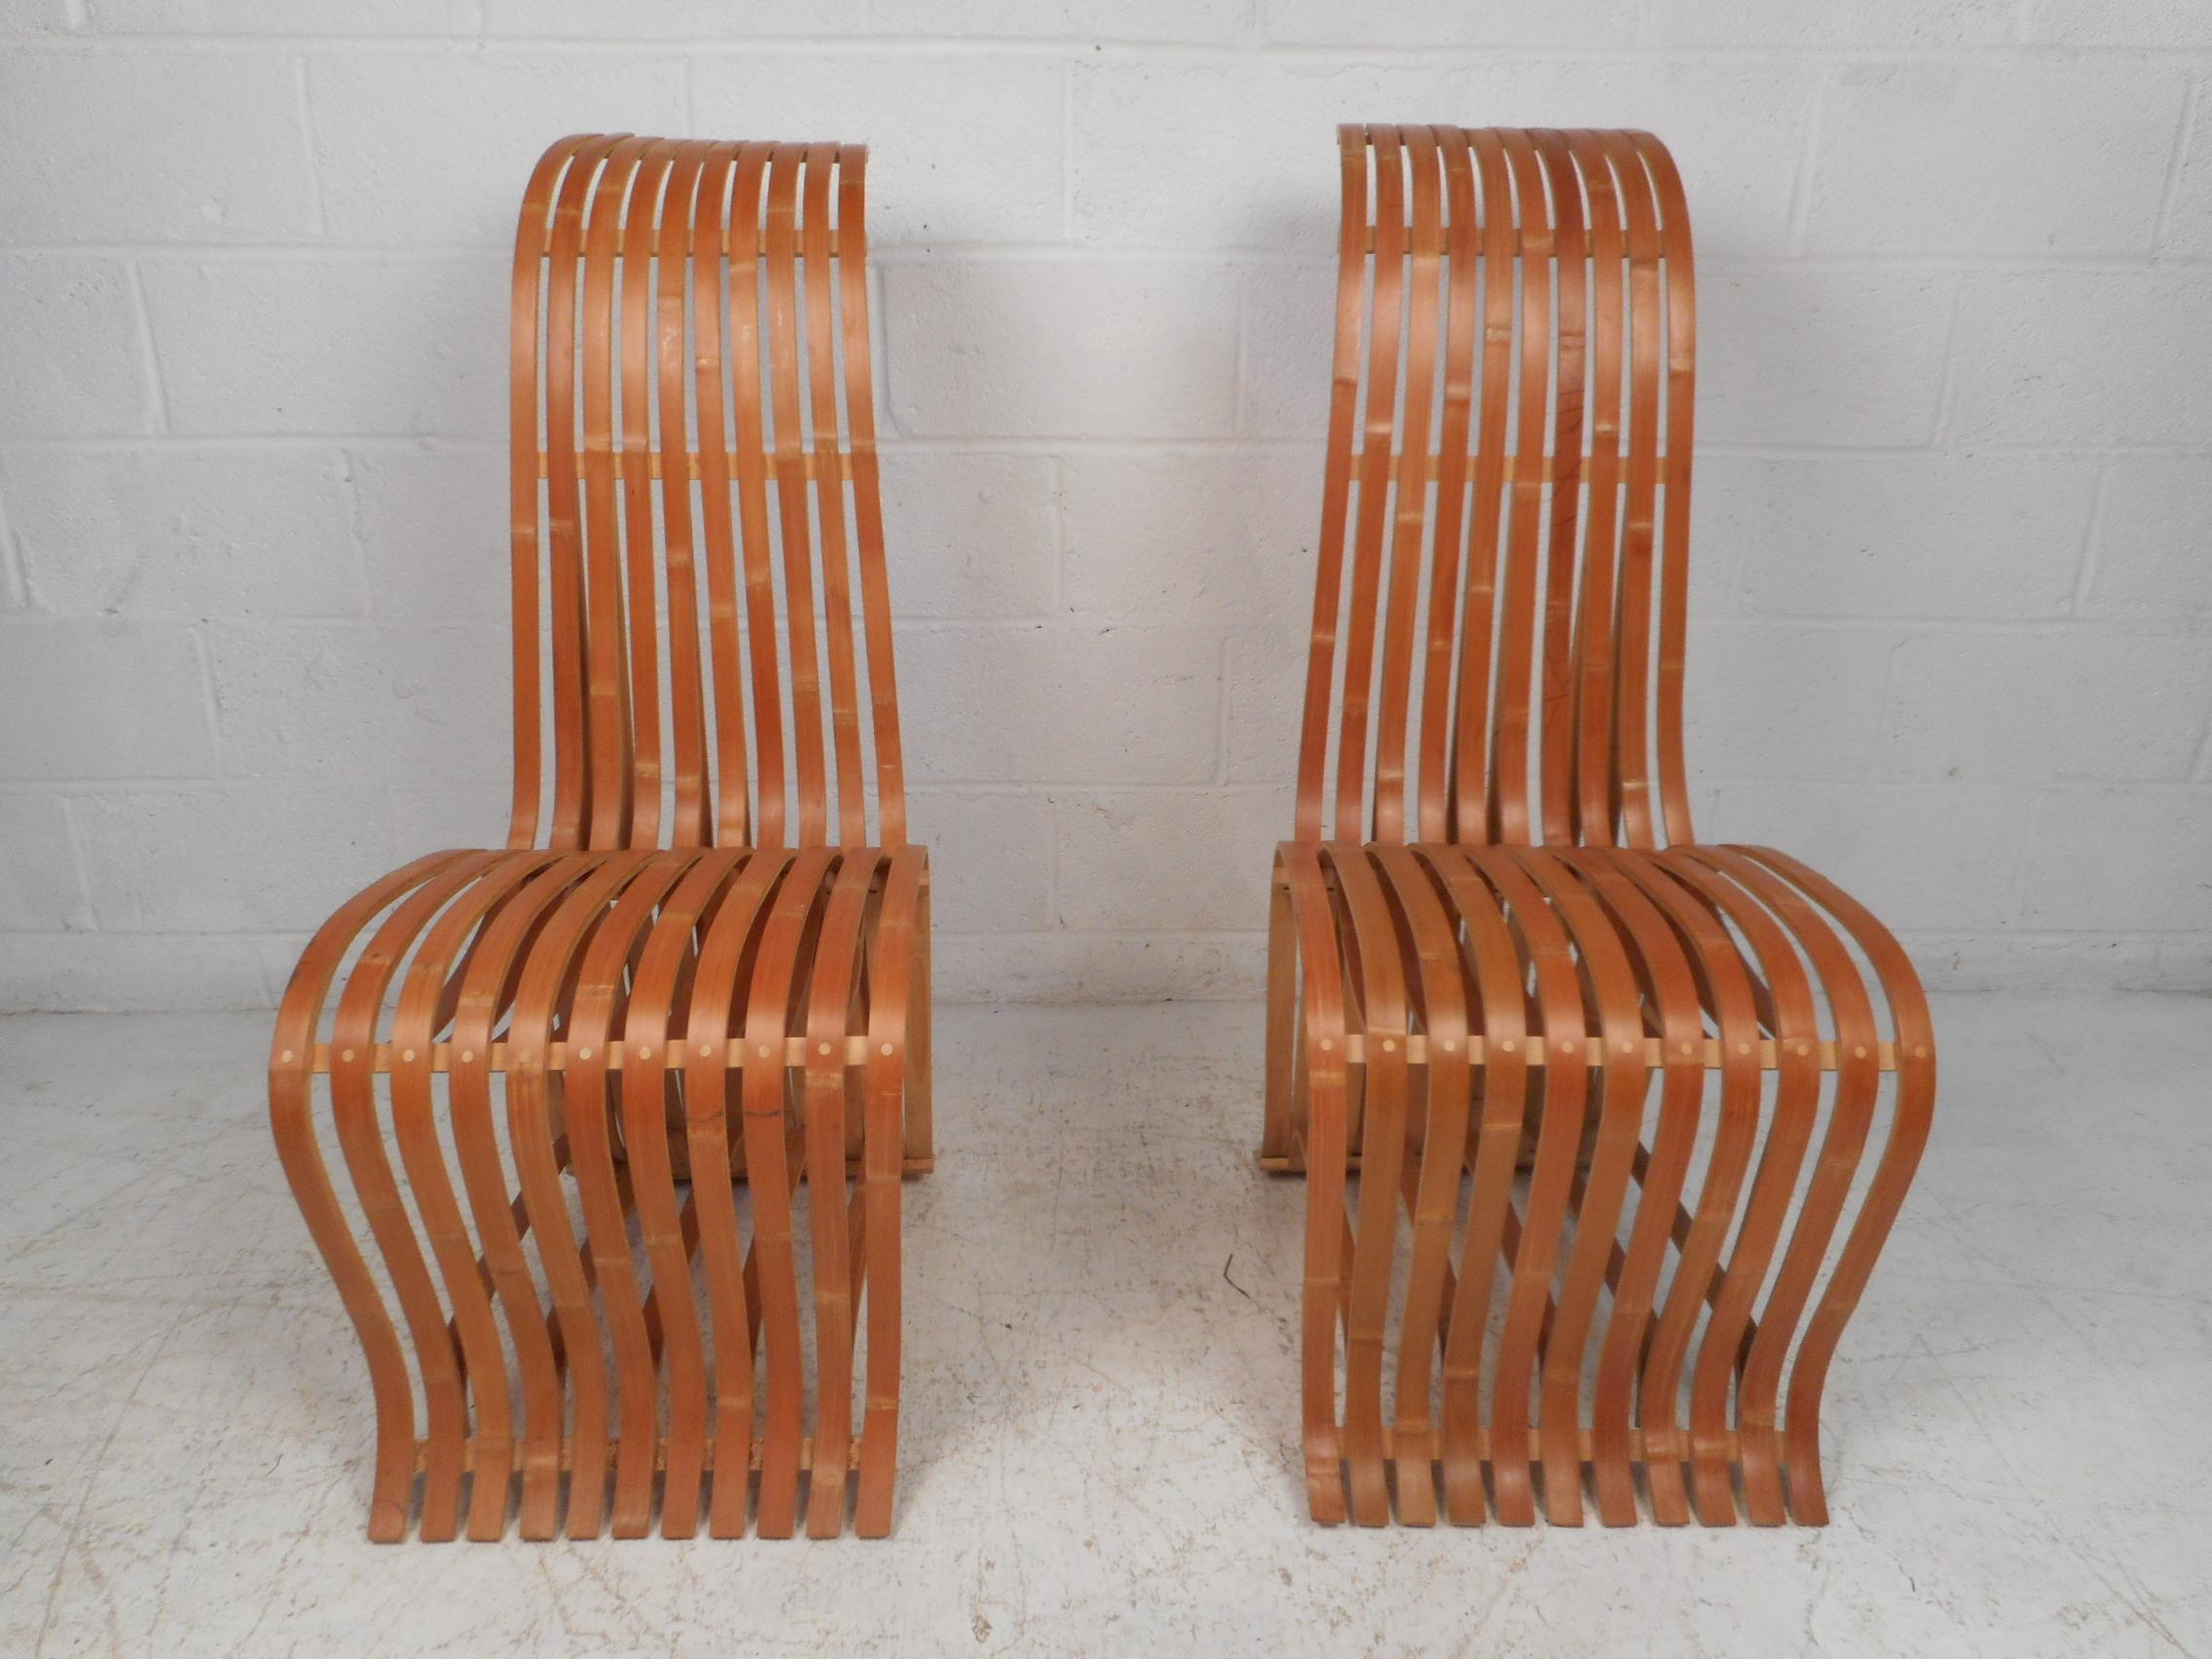 Interesting and unusual pair of wooden slat chairs. Quirky yet sturdy design. Great addition to any modern interior. Please confirm item location with dealer (NJ or NY).